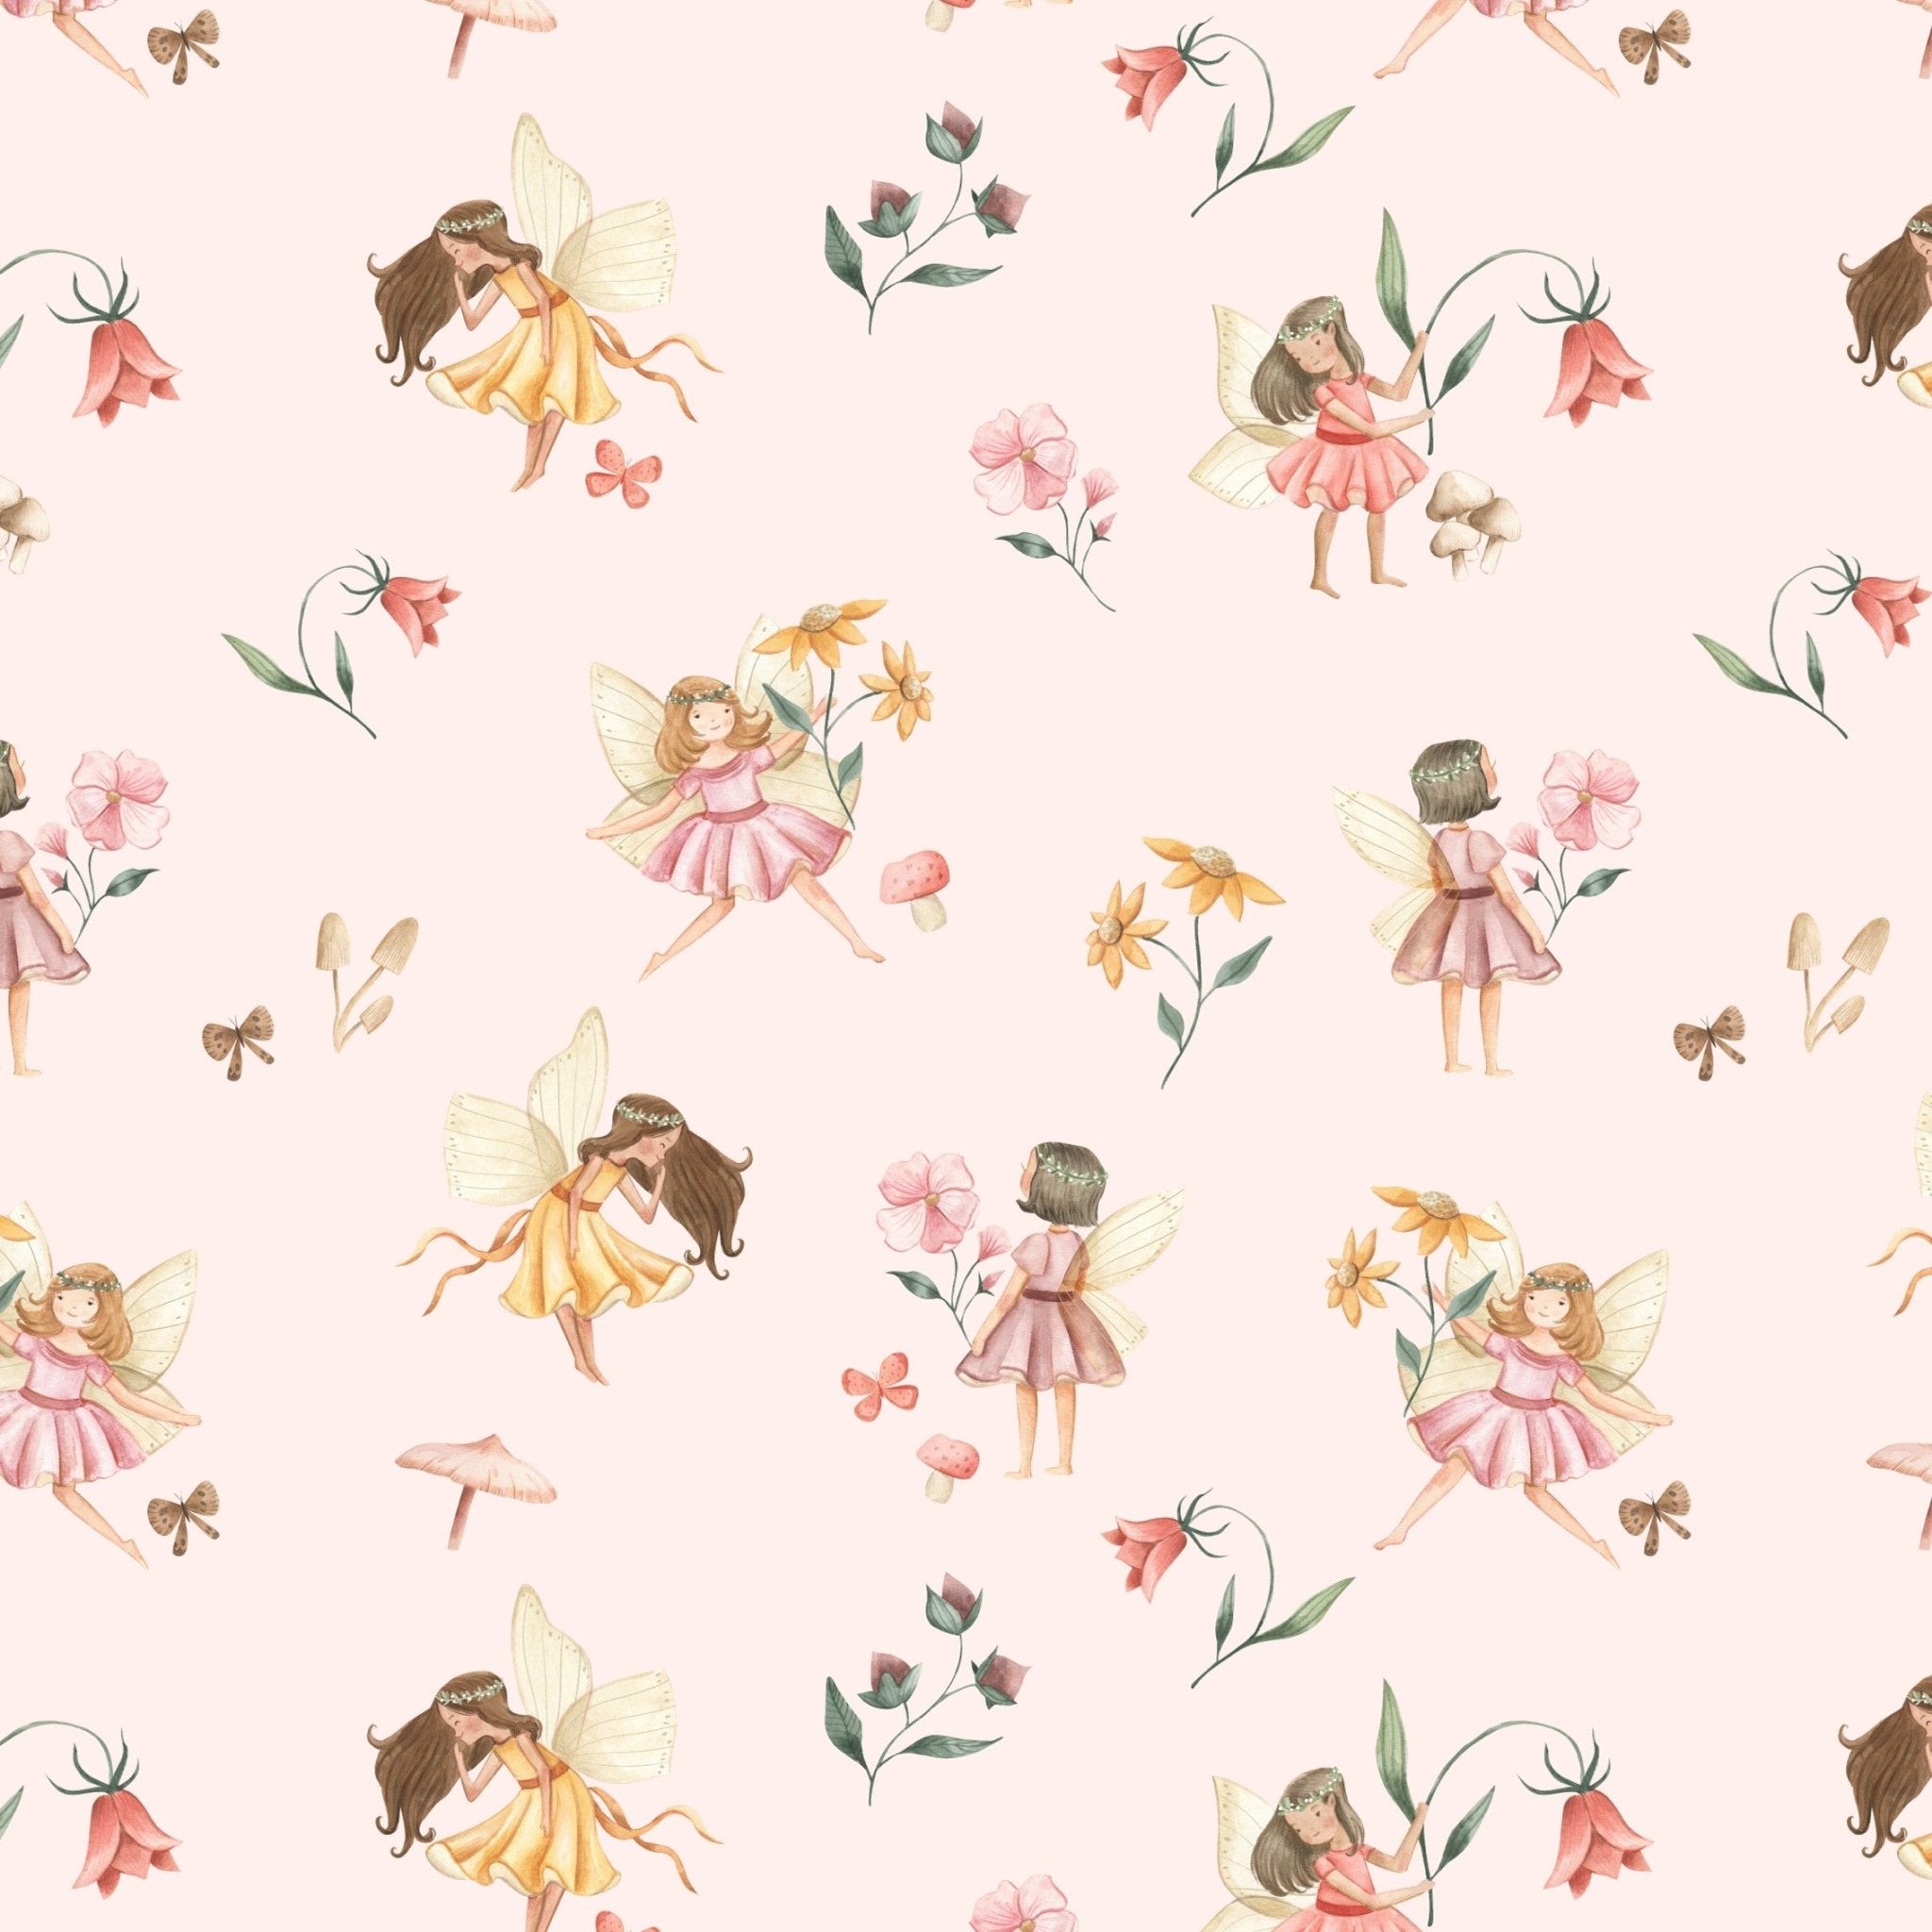 A close-up of the fairy-themed wallpaper showing detailed illustrations of fairies, flowers, mushrooms, and butterflies in a soft color palette on a pink background